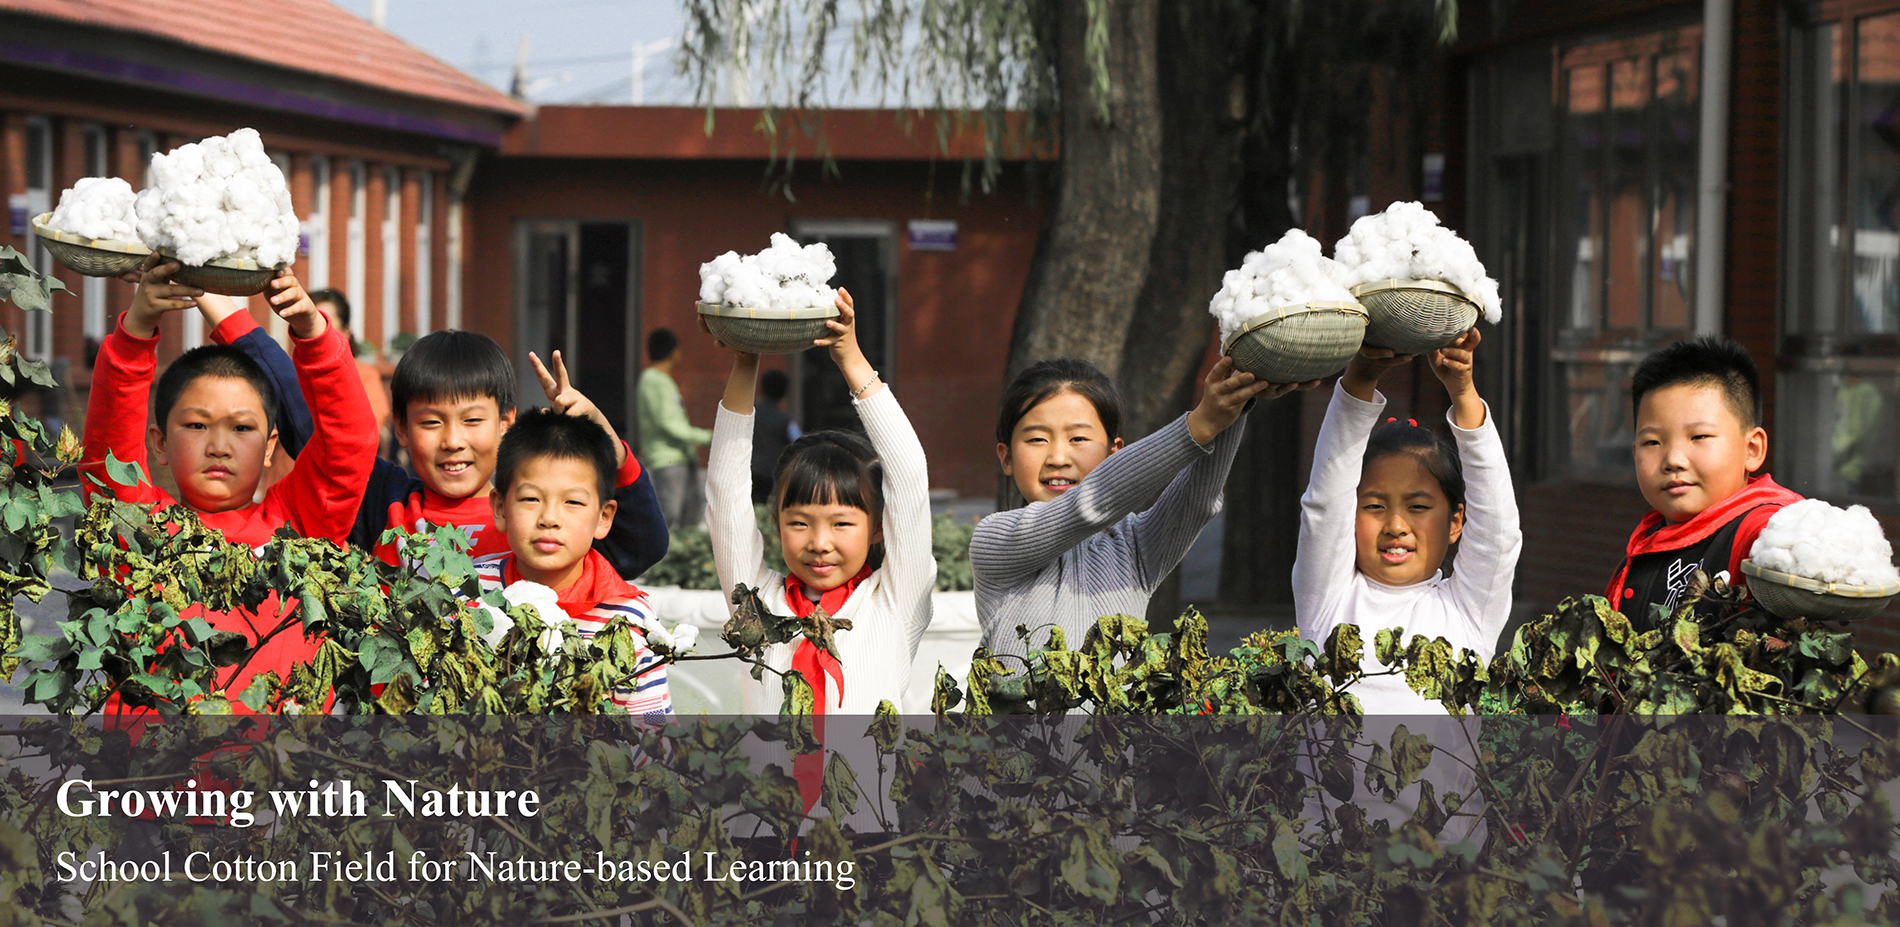 School Cotton Field for Nature-based Learning